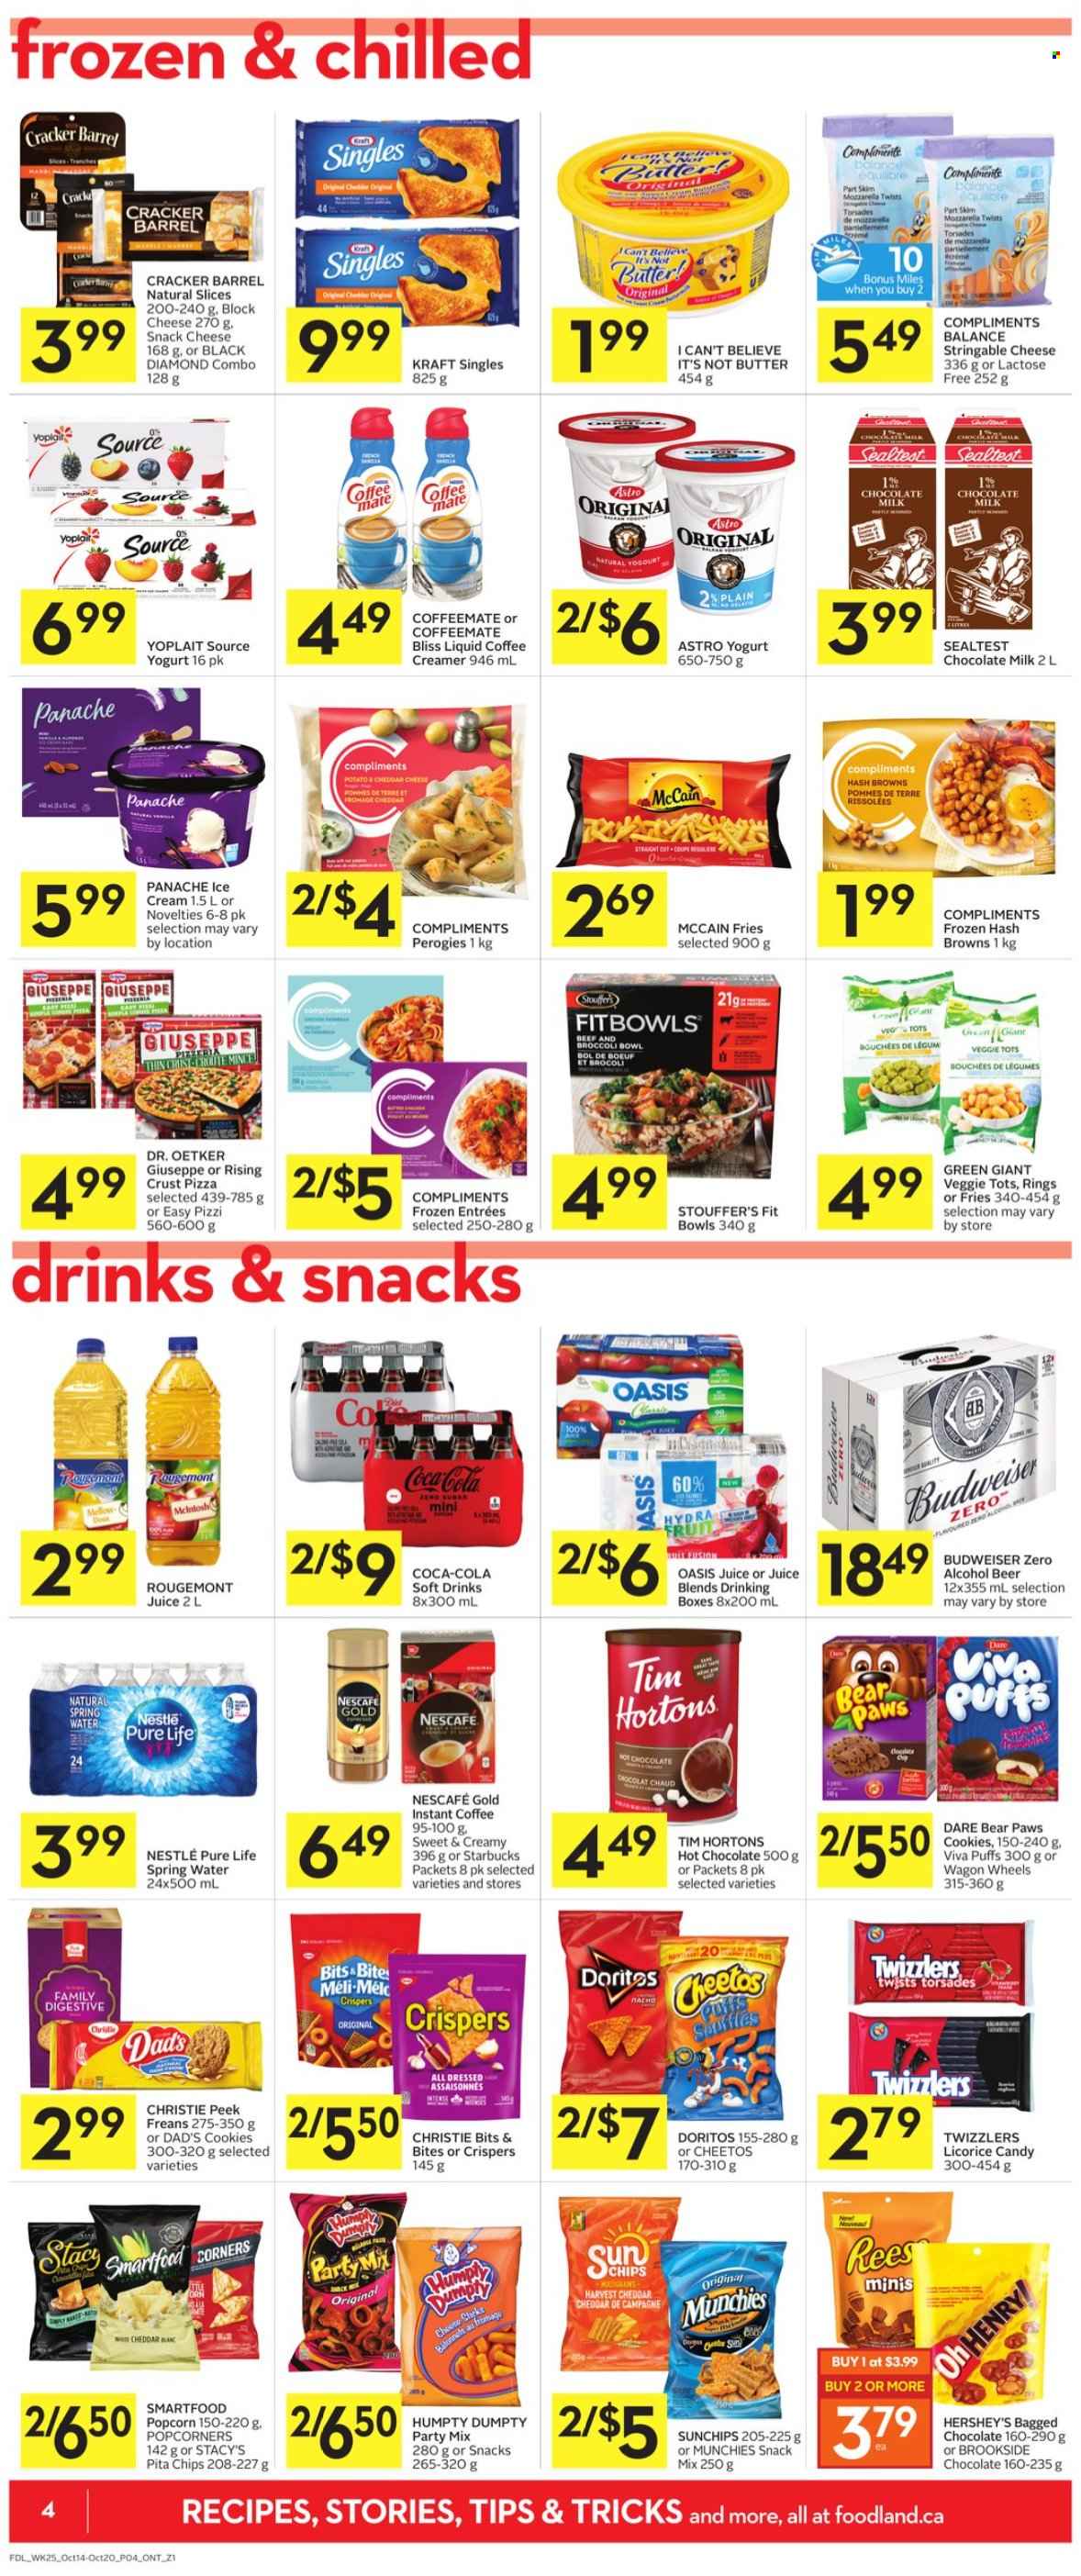 thumbnail - Foodland Flyer - October 14, 2021 - October 20, 2021 - Sales products - puffs, pizza, Kraft®, sandwich slices, Dr. Oetker, Kraft Singles, yoghurt, Yoplait, Coffee-Mate, milk, butter, I Can't Believe It's Not Butter, creamer, ice cream, Hershey's, Stouffer's, McCain, hash browns, potato fries, cookies, milk chocolate, crackers, Digestive, Doritos, Cheetos, Smartfood, popcorn, pita chips, sugar, Coca-Cola, juice, soft drink, spring water, hot chocolate, instant coffee, Starbucks, alcohol, beer, Nestlé, Budweiser, Nescafé. Page 6.